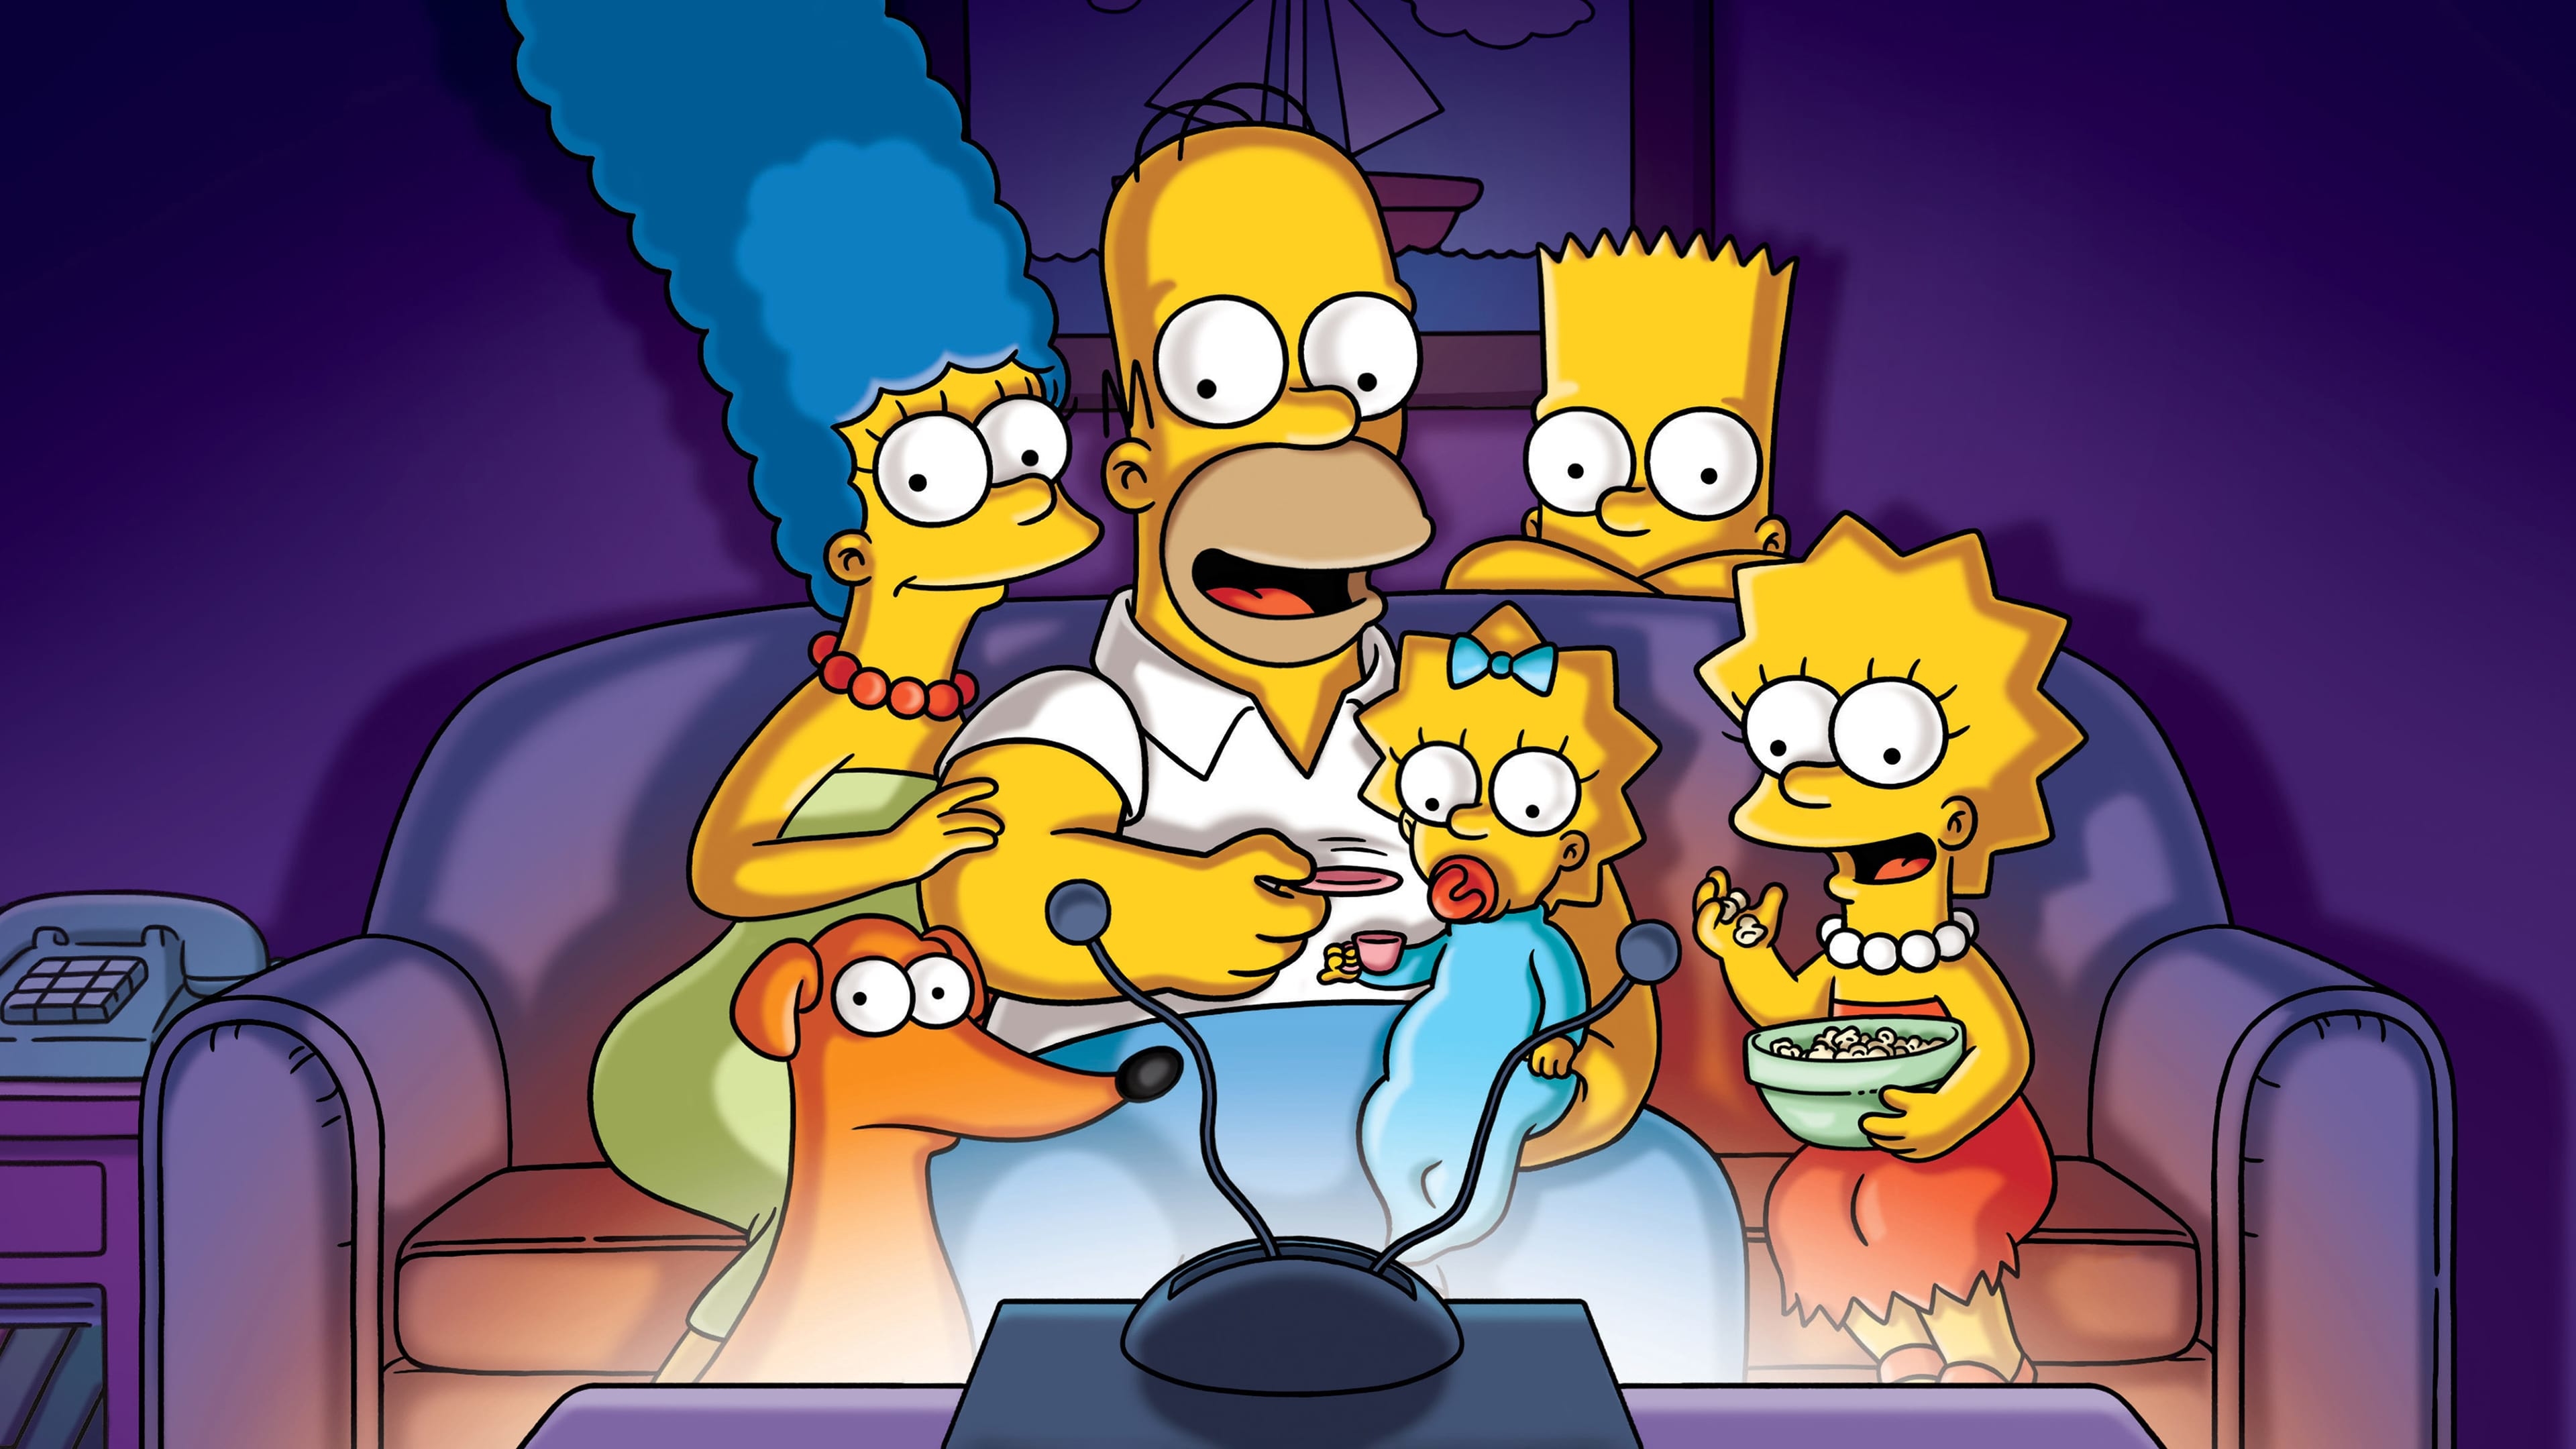 Detail Image Of The Simpsons Family Nomer 30